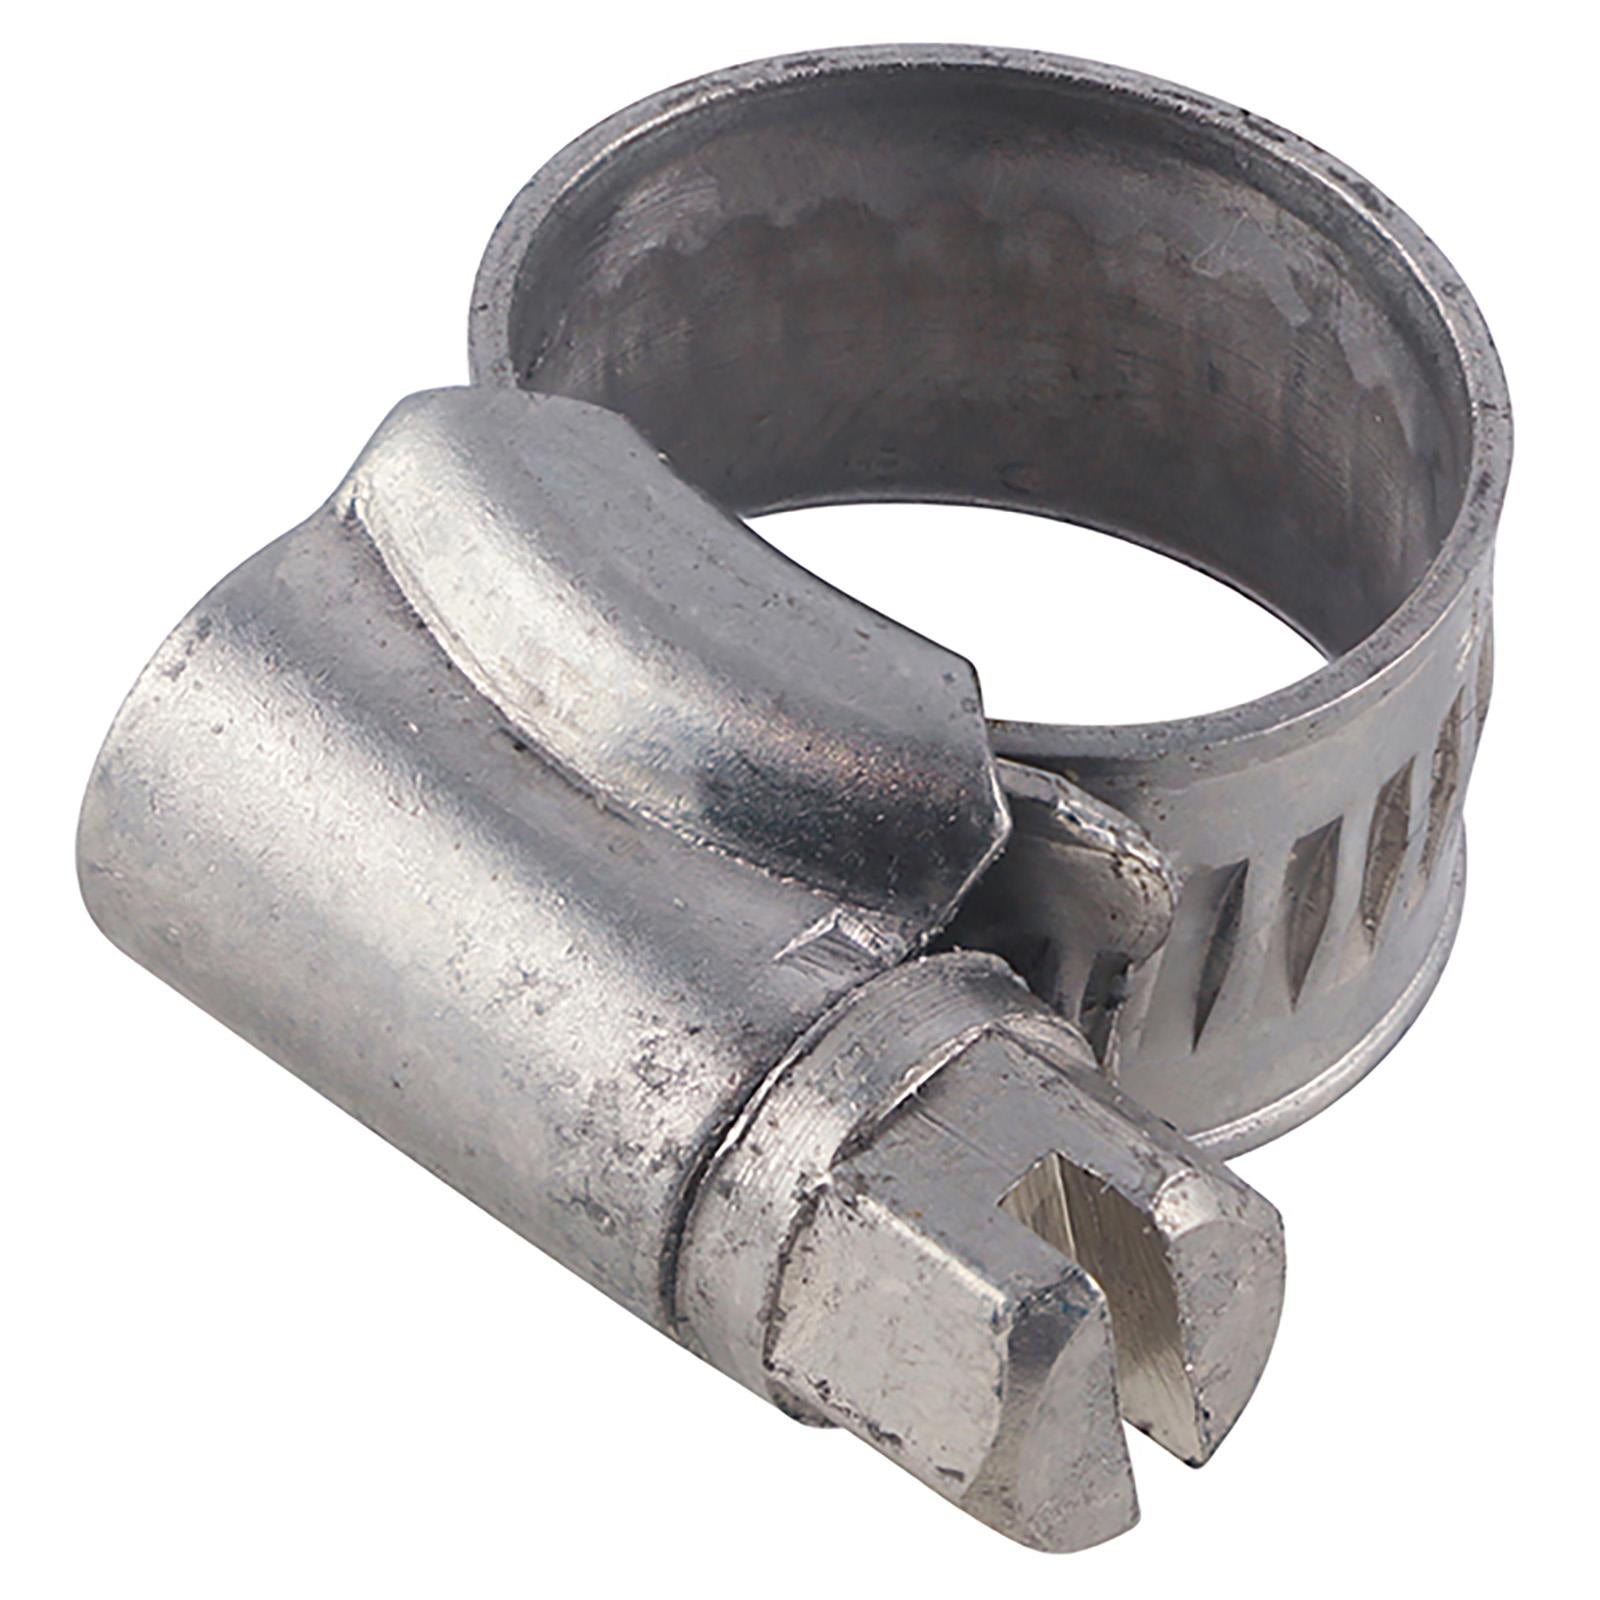 TIMCO Hose Clips Clamps Zinc or Stainless Steel - Choose Size